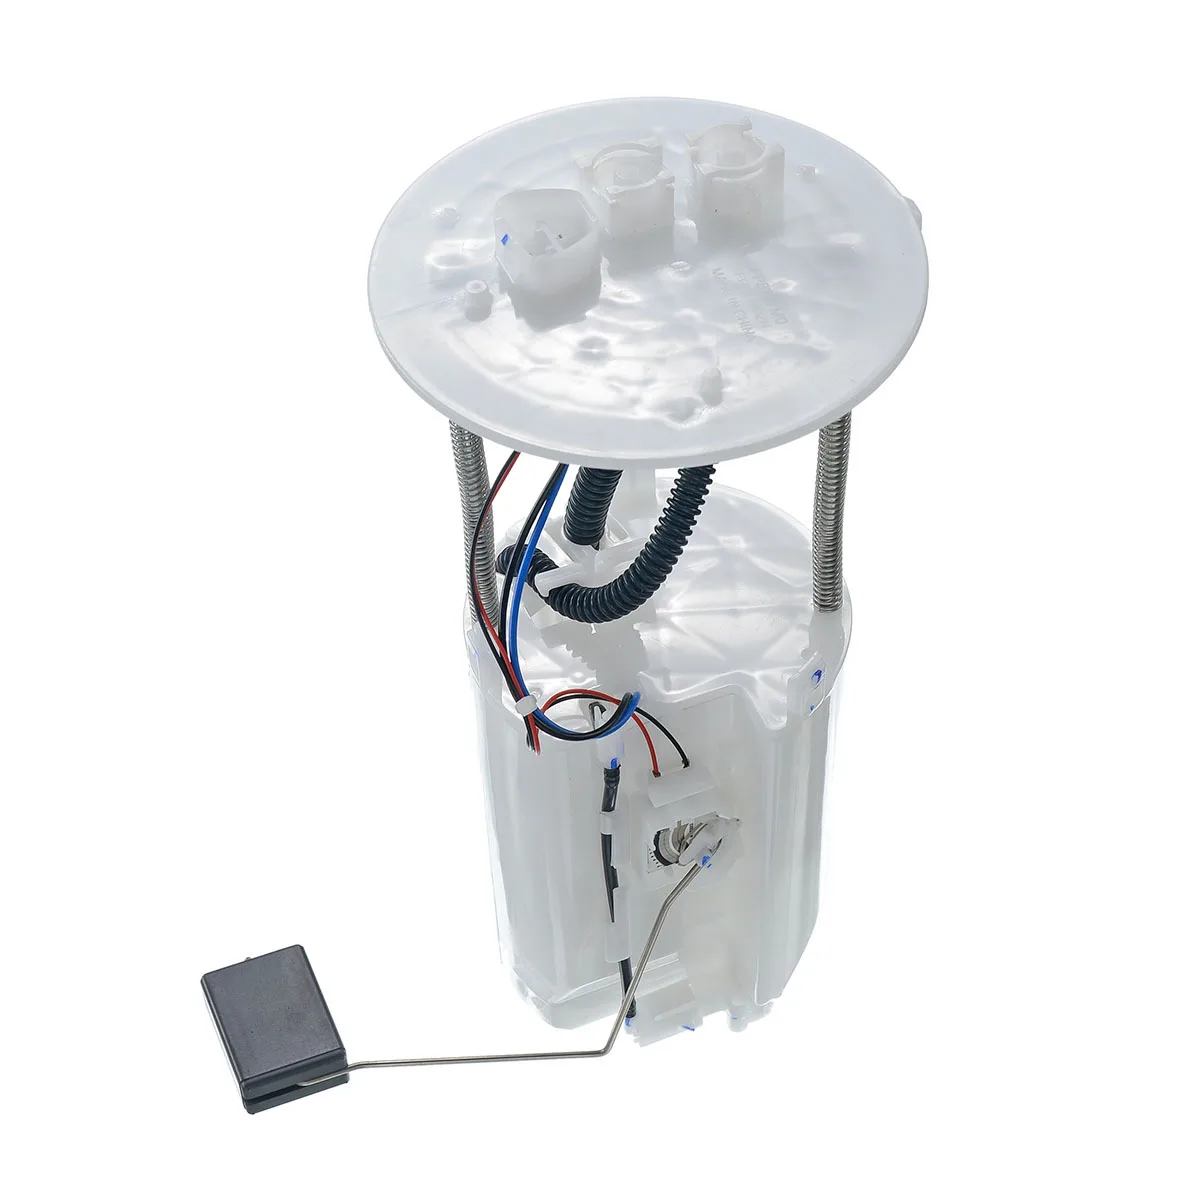 

In-stock CN US Fuel Pump Module Assembly for Lexus GX470 Toyota 4Runner 4.7L 2005-2009 E8797M FG1761